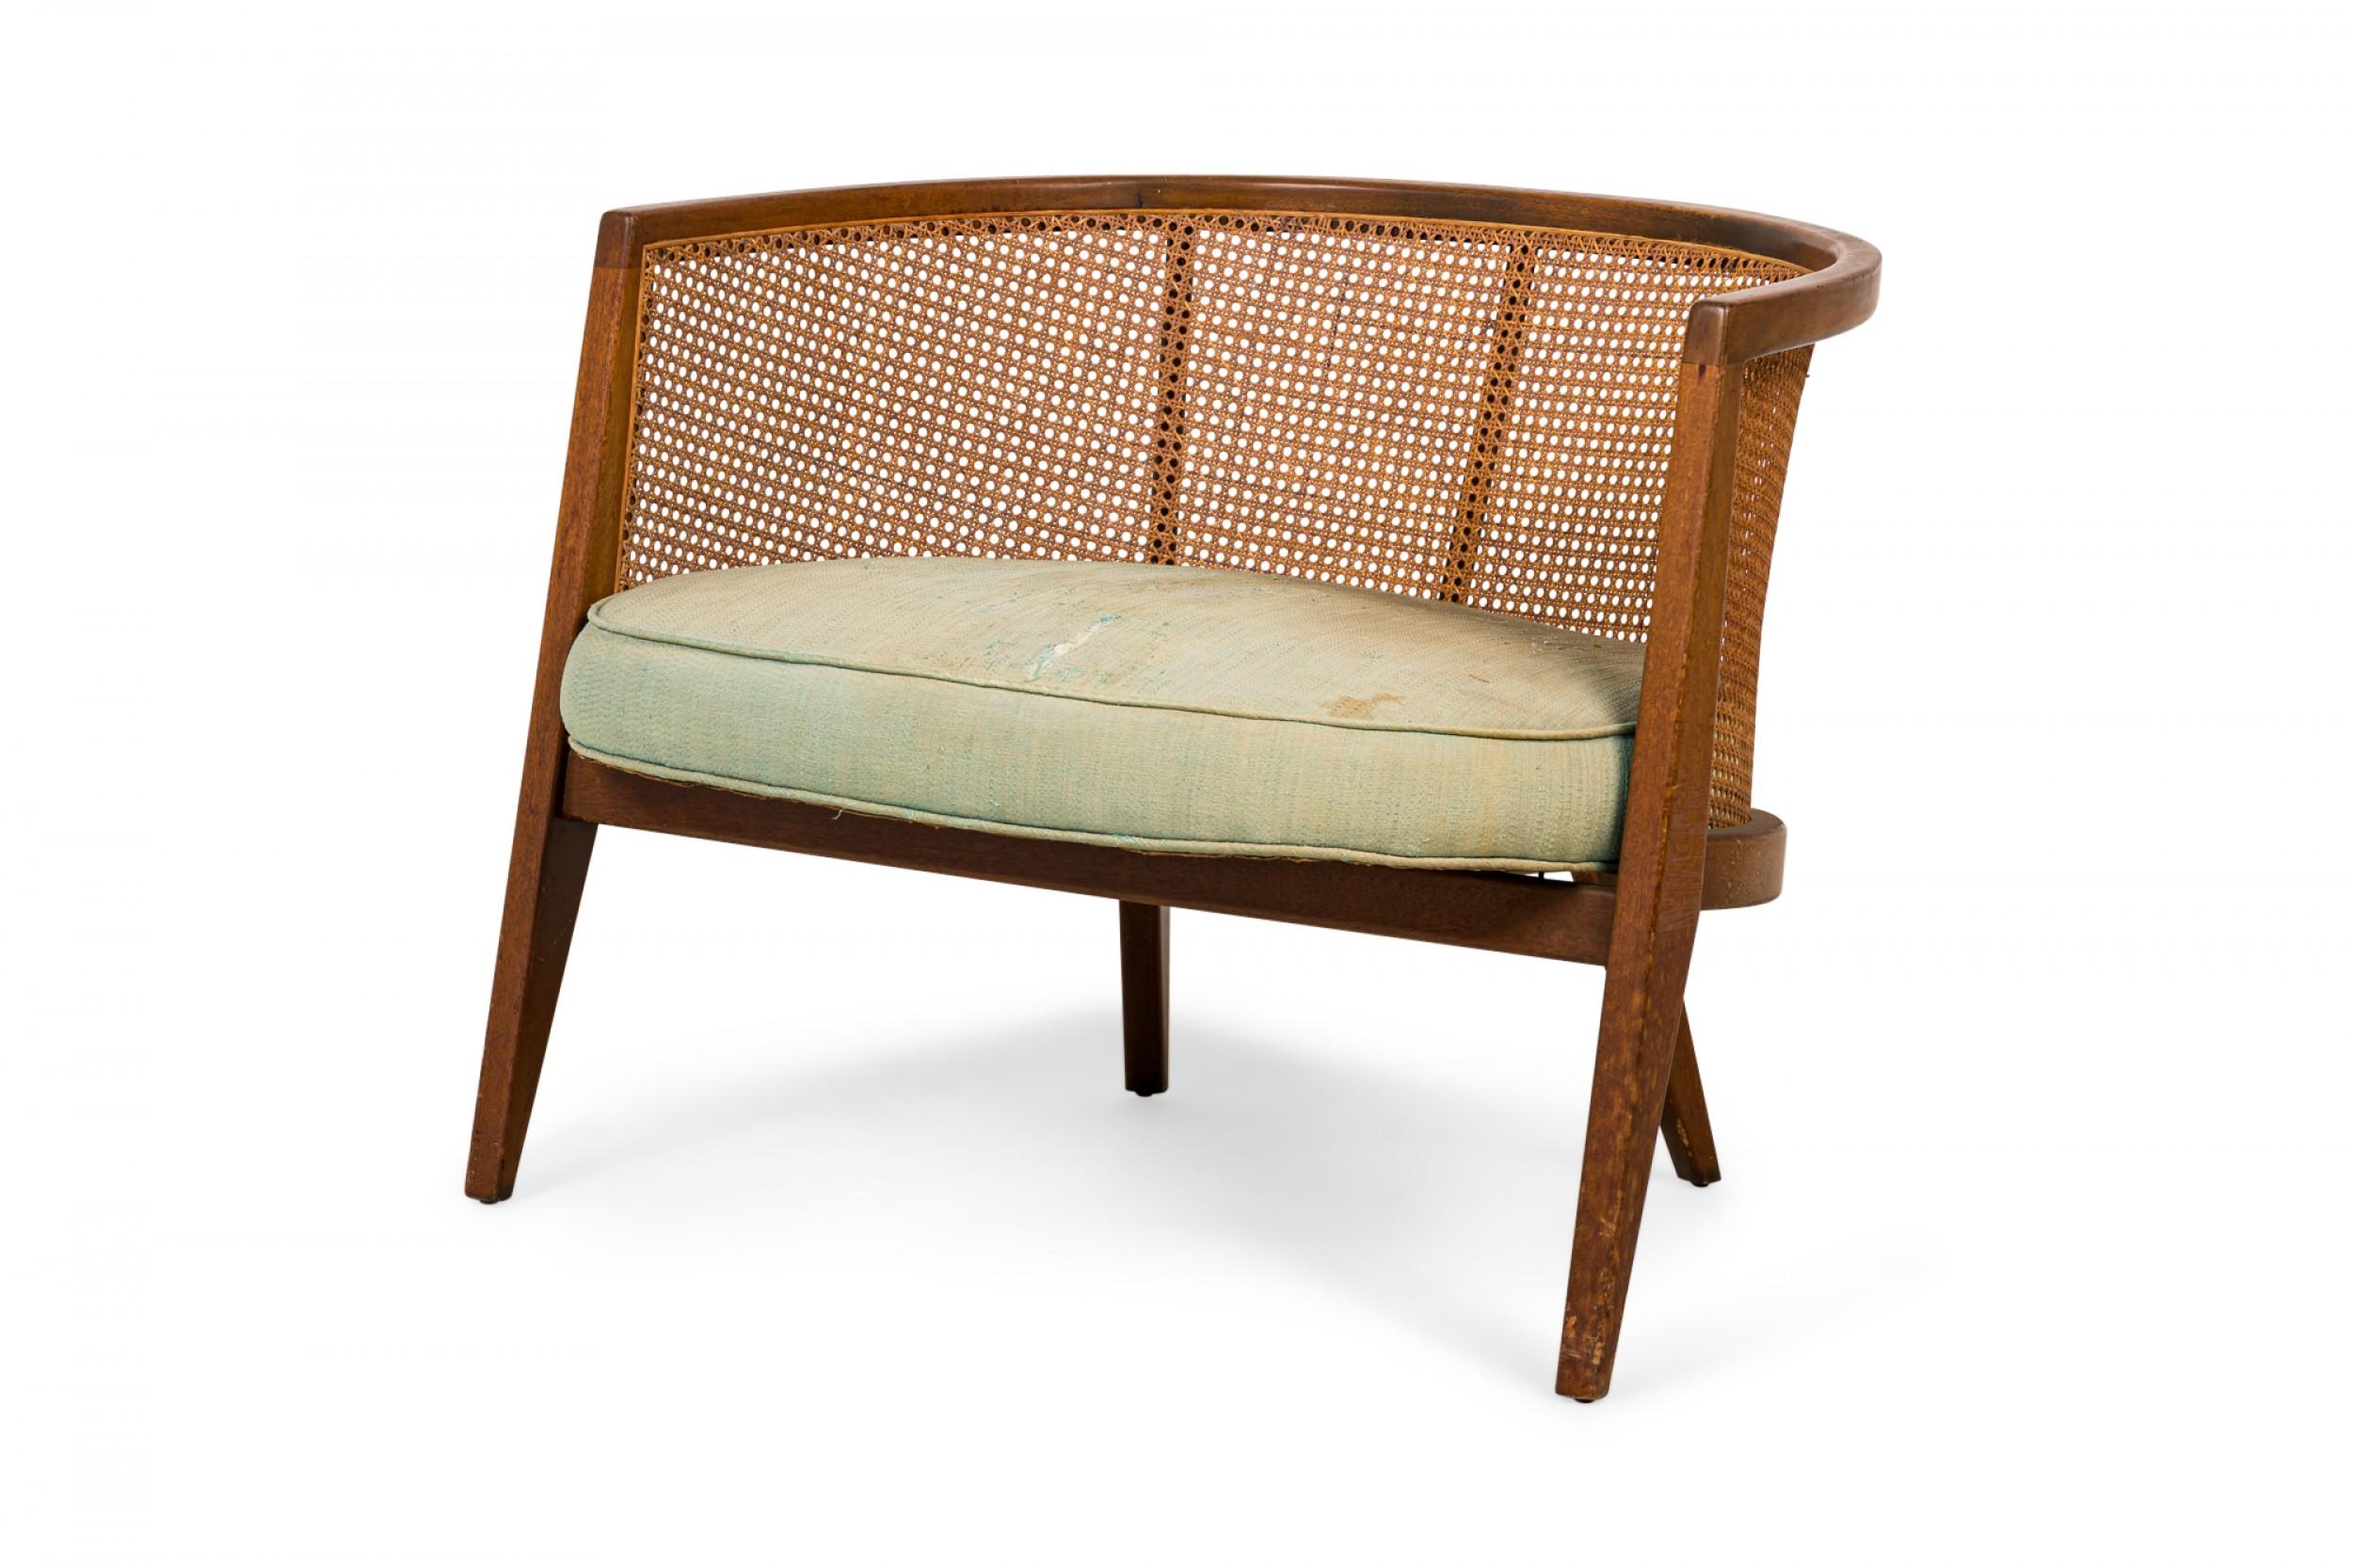 American mid-century hoop form lounge armchair with a curved wooden frame, caned back, seat, and sides, and a light green fabric upholstered seat cushion, resting on four angled tapered square legs. (HARVEY PROBBER)
 